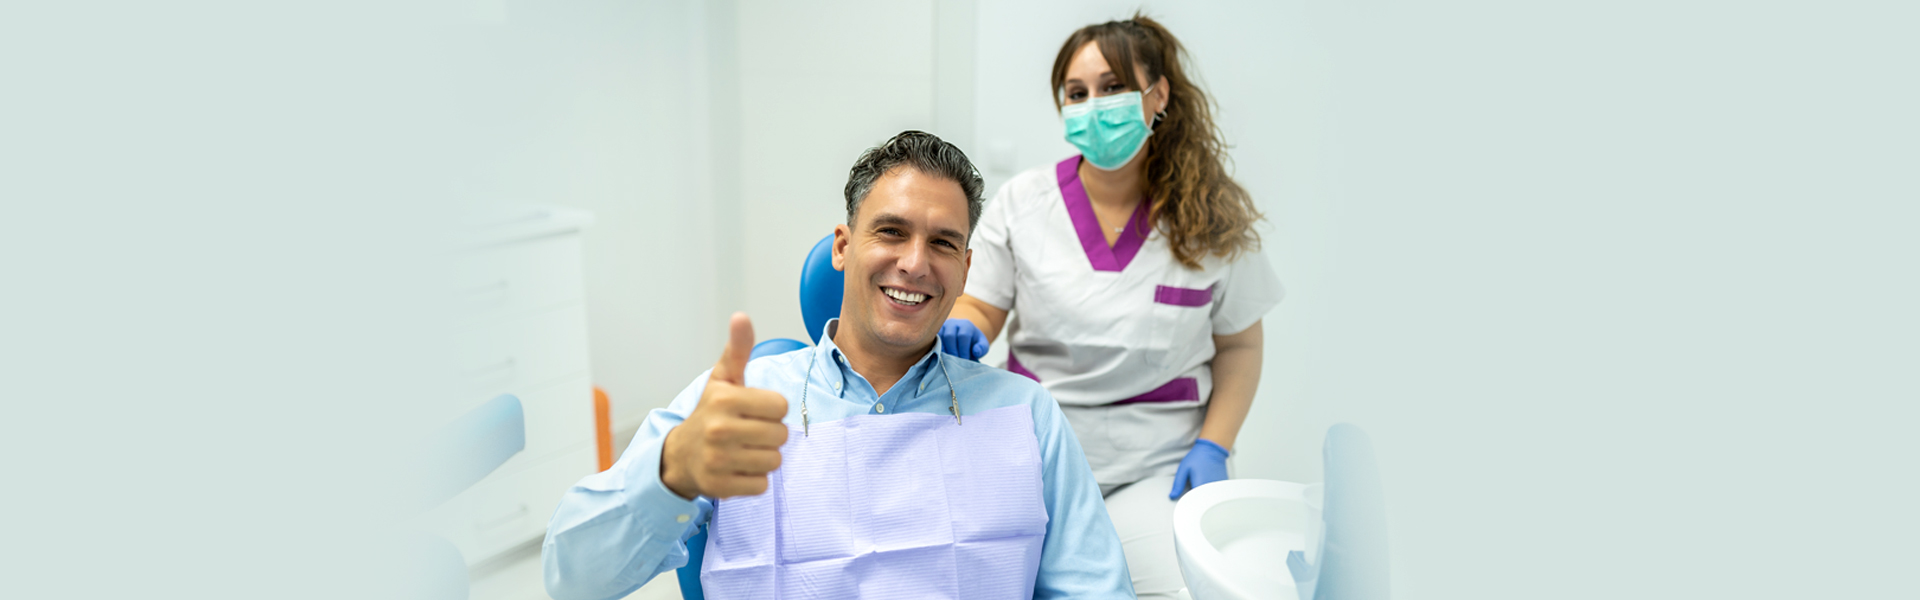 How Long Does It Take For A Dental Bridge To Feel Normal?